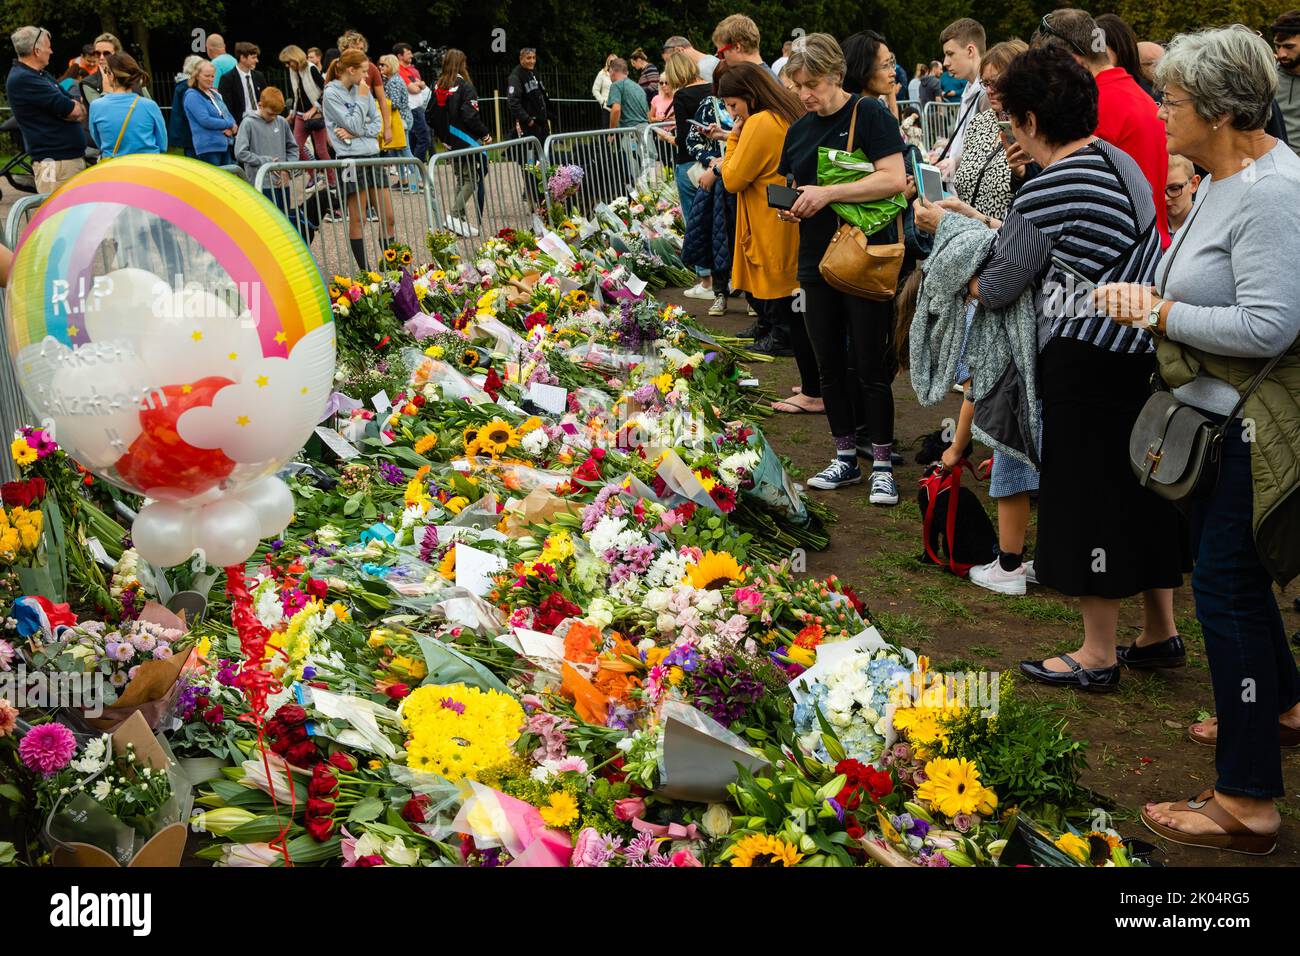 Windsor, UK. 9th September, 2022. Visitors leave floral tributes outside Cambridge Gate at Windsor Castle a day after the death of Queen Elizabeth II. Queen Elizabeth II, the UK's longest-serving monarch, died at Balmoral aged 96 after a reign lasting 70 years. Credit: Mark Kerrison/Alamy Live News Stock Photo